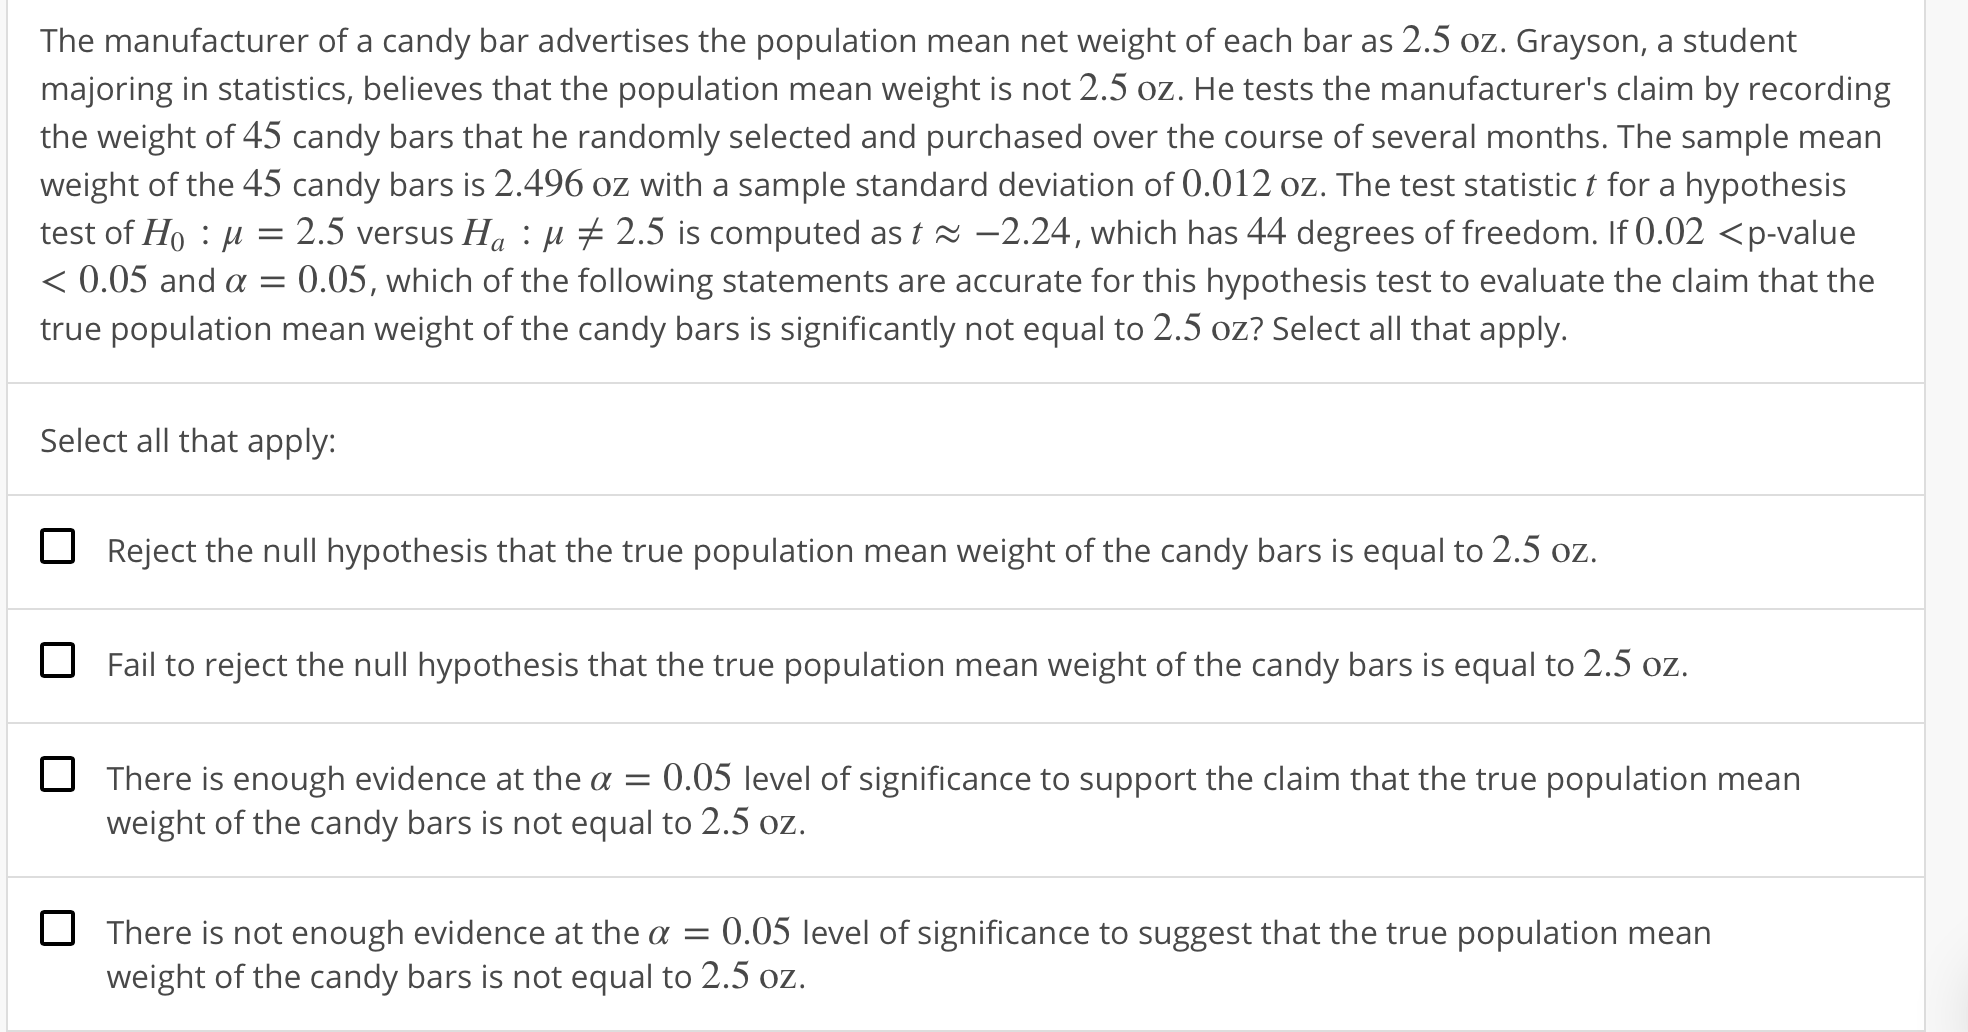 The manufacturer of a candy bar advertises the population mean net weight of each bar as 2.5 oz. Grayson, a student
majoring in statistics, believes that the population mean weight is not 2.5 oz. He tests the manufacturer's claim by recording
the weight of 45 candy bars that he randomly selected and purchased over the course of several months. The sample mean
weight of the 45 candy bars is 2.496 oz with a sample standard deviation of 0.012 oz. The test statistic t for a hypothesis
test of Ho : μ-2.5 versus Ha : μ 2.5 is computed as 18-224, which has 44 degrees of freedom. If O.02 <p-value
0.05 and α = 0.05, which of the following statements are accurate for this hypothesis test to evaluate the claim that the
true
n mean weight of the candy bars is significantly not equal to 2.5 oz? Select all that apply.
Select all that apply:
Reject the null hypothesis that the true population mean weight of the candy bars is equal to 2.5 oz
Fail to reject the null hypothesis that the true population mean weight of the candy bars is equal to 2.5 oz.
There is enough evidence at the α-0.05 level of significance to support the claim that the true population mean
weight of the candy bars is not equal to 2.5 oz
There is not enough evidence at the a 0.05 level of significance to suggest that the true population mean
weight of the candy bars is not equal to 2.5 oz
